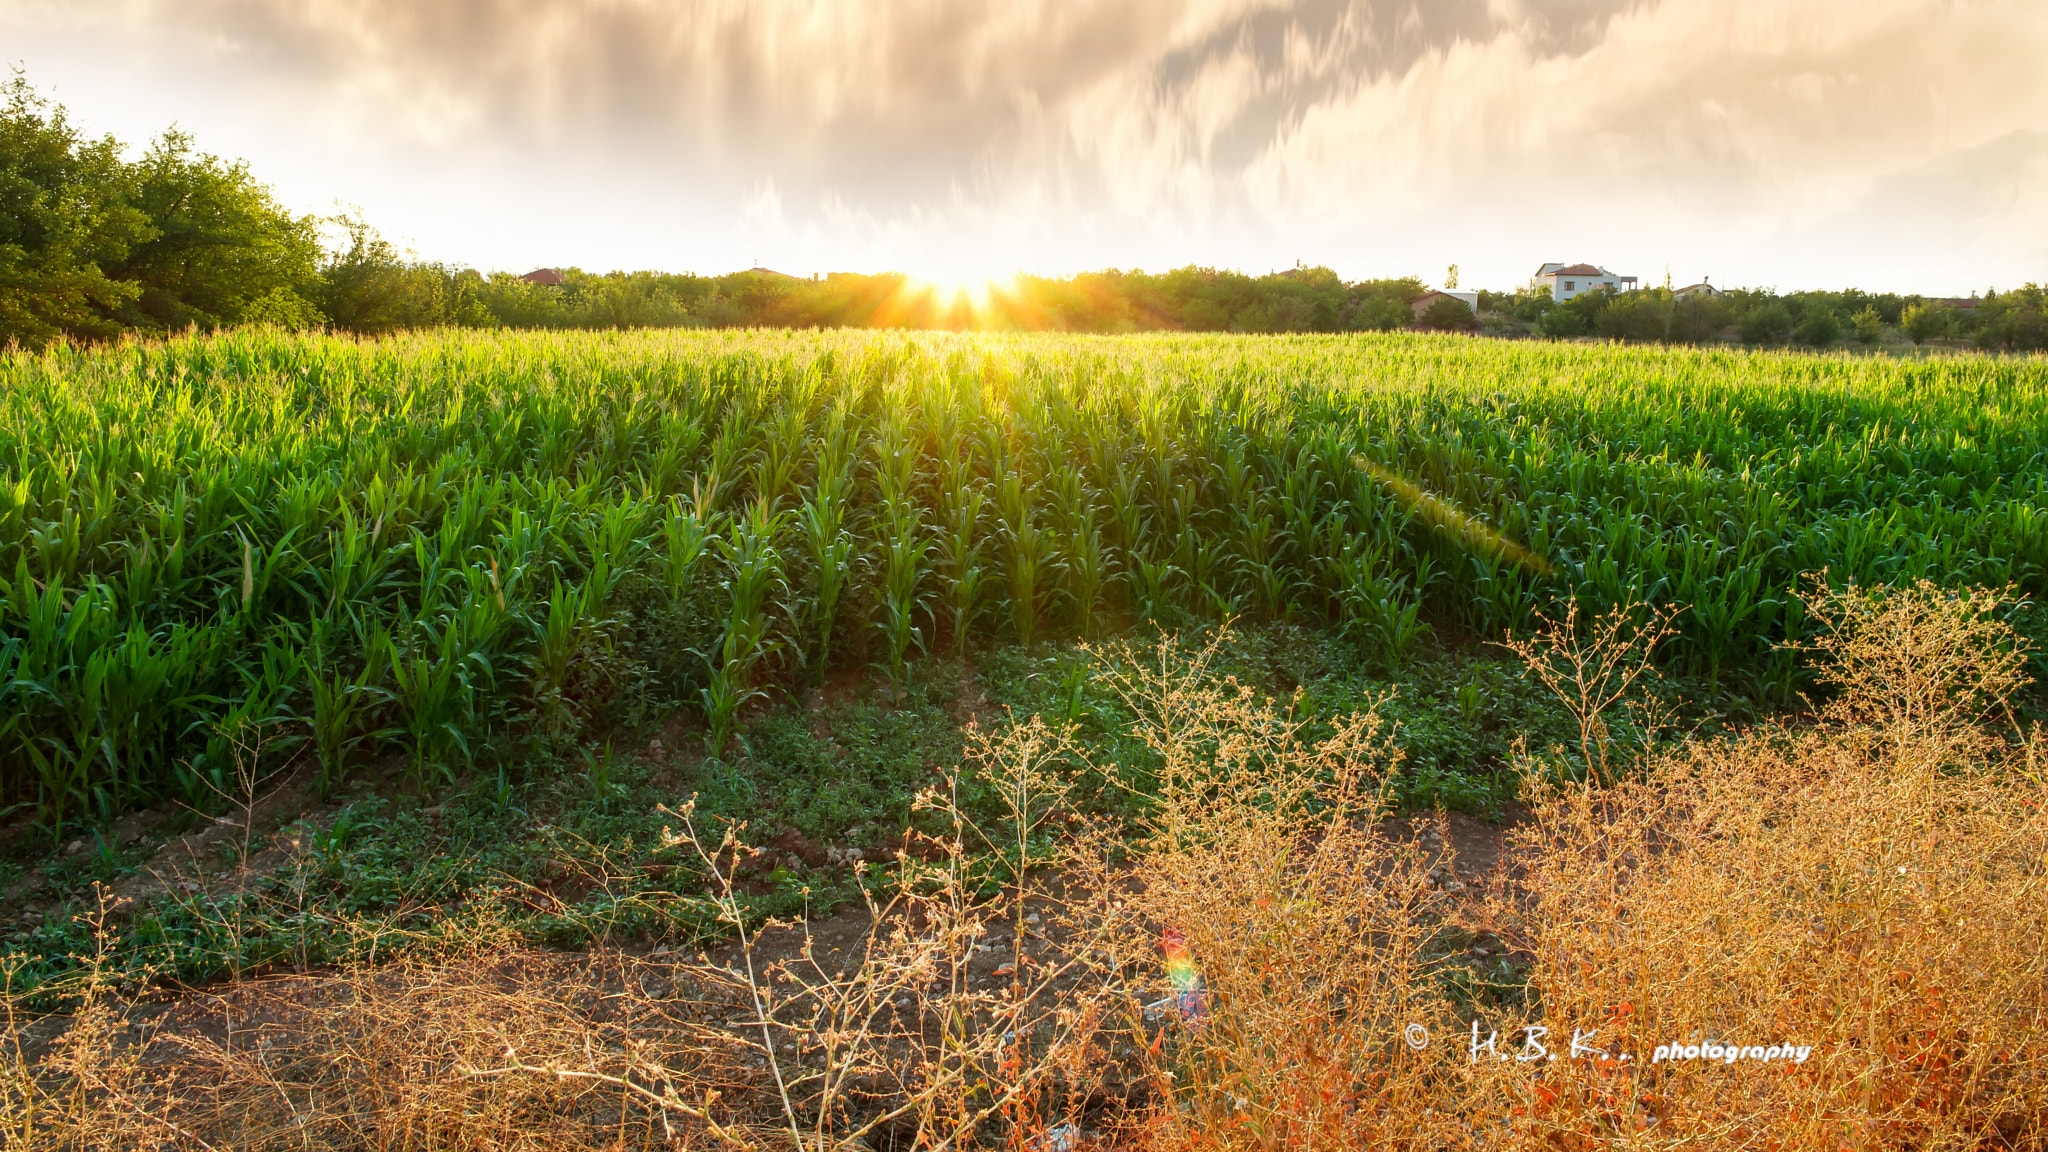 NX 16mm F2.4 sample photo. The sun,wellcome to the cornfield photography